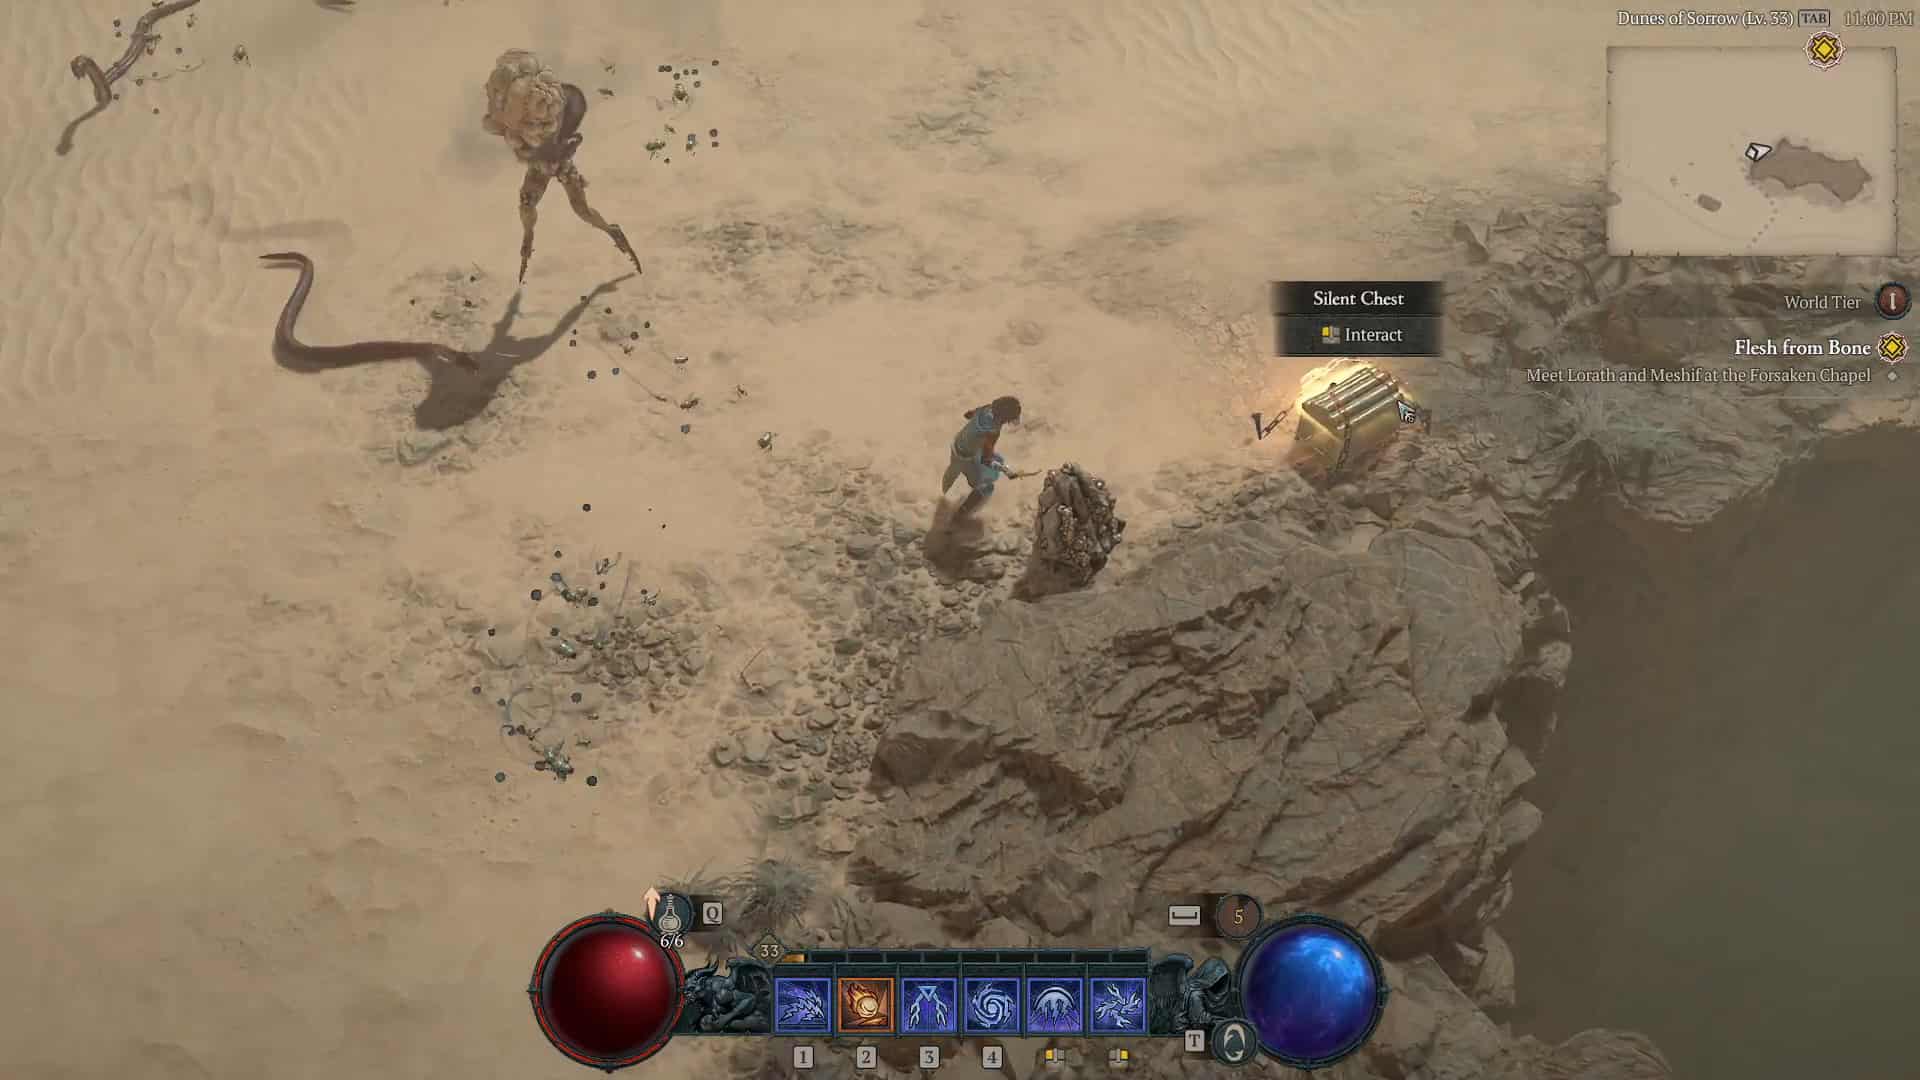 Diablo 4 Silent Chest locations: An image of a Diablo 4 player next to a Silent Chest.